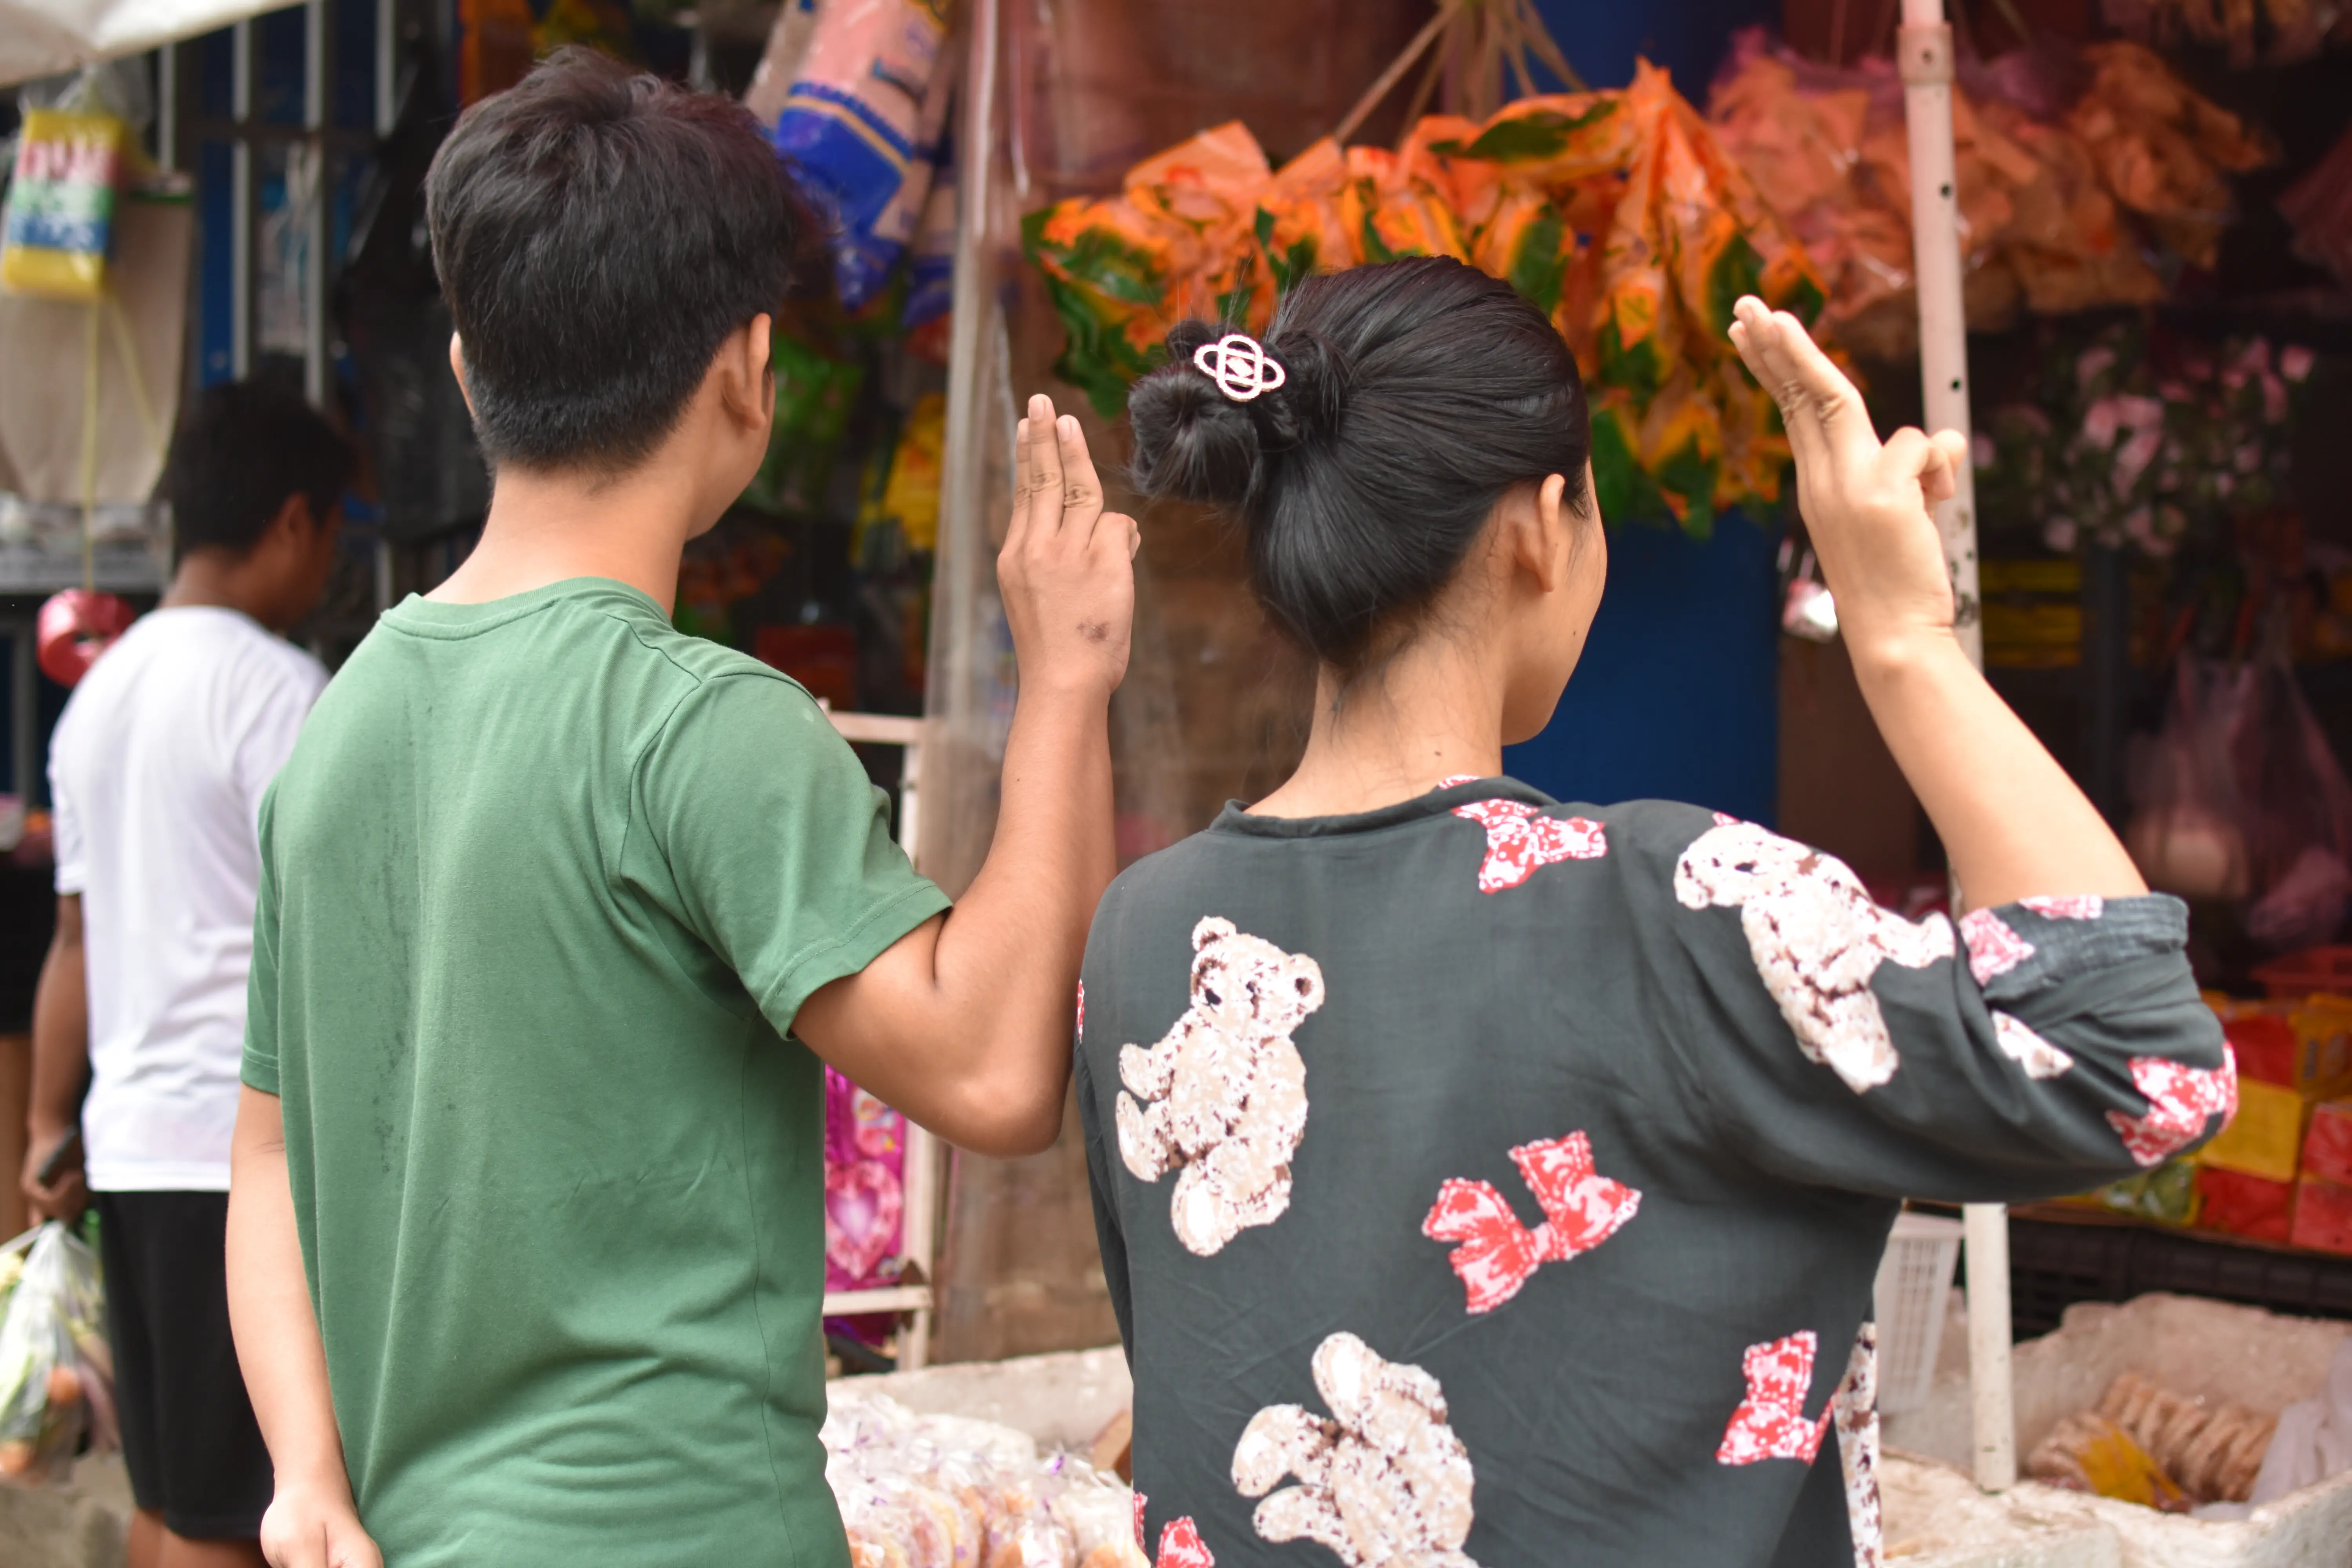 A man and woman hold up three fingers with their right hands in a market.